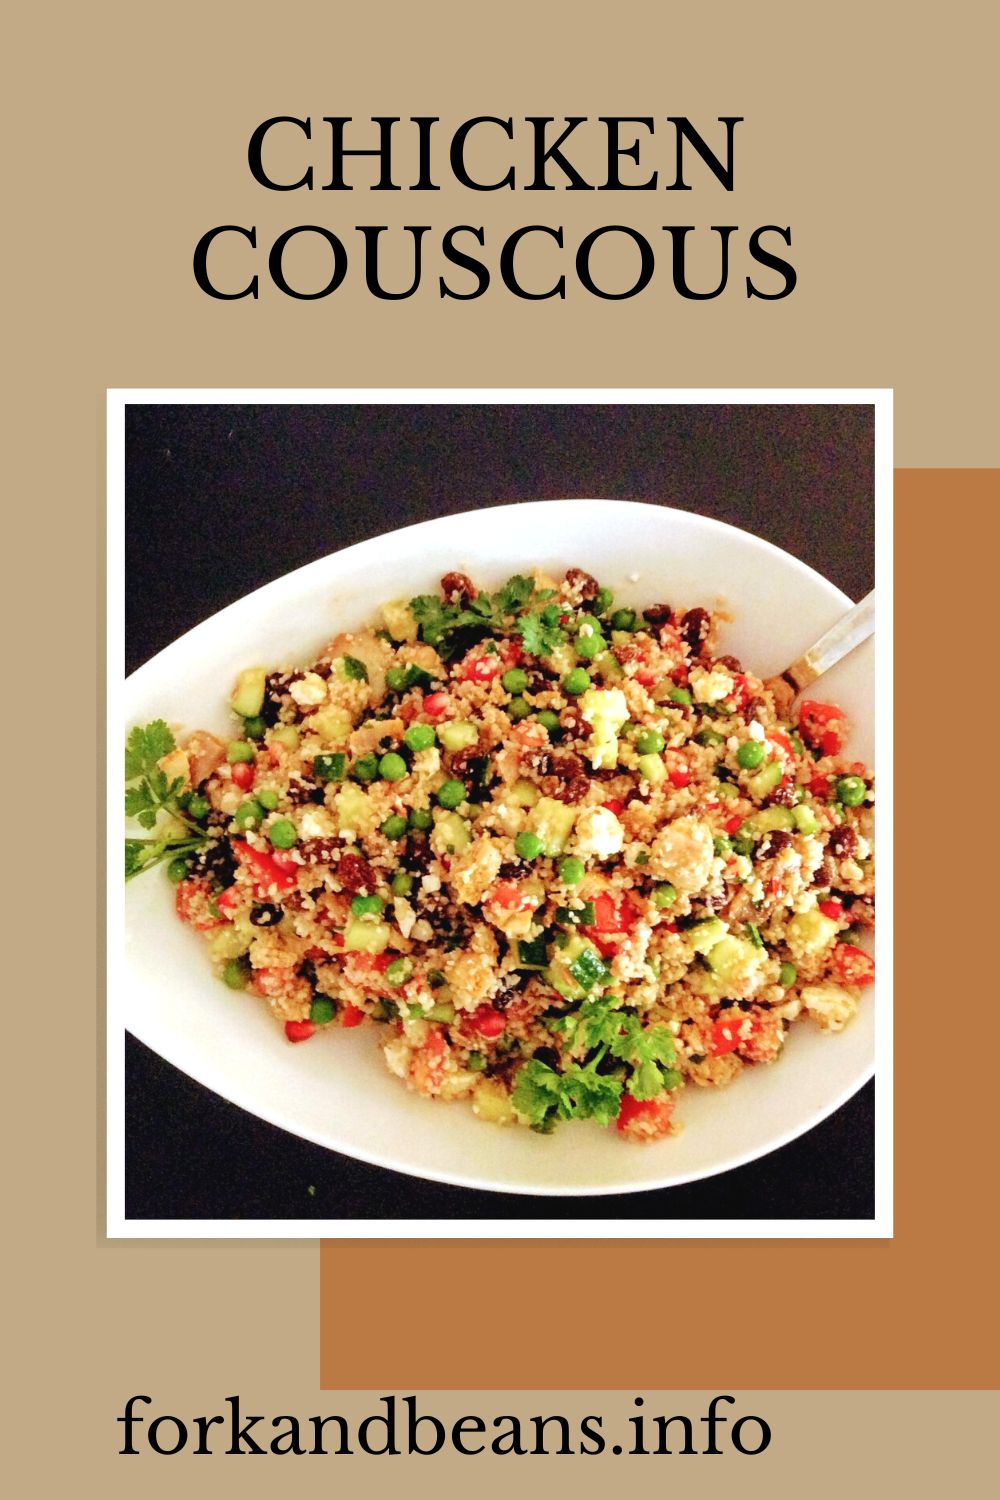 Salad with Chicken Couscous